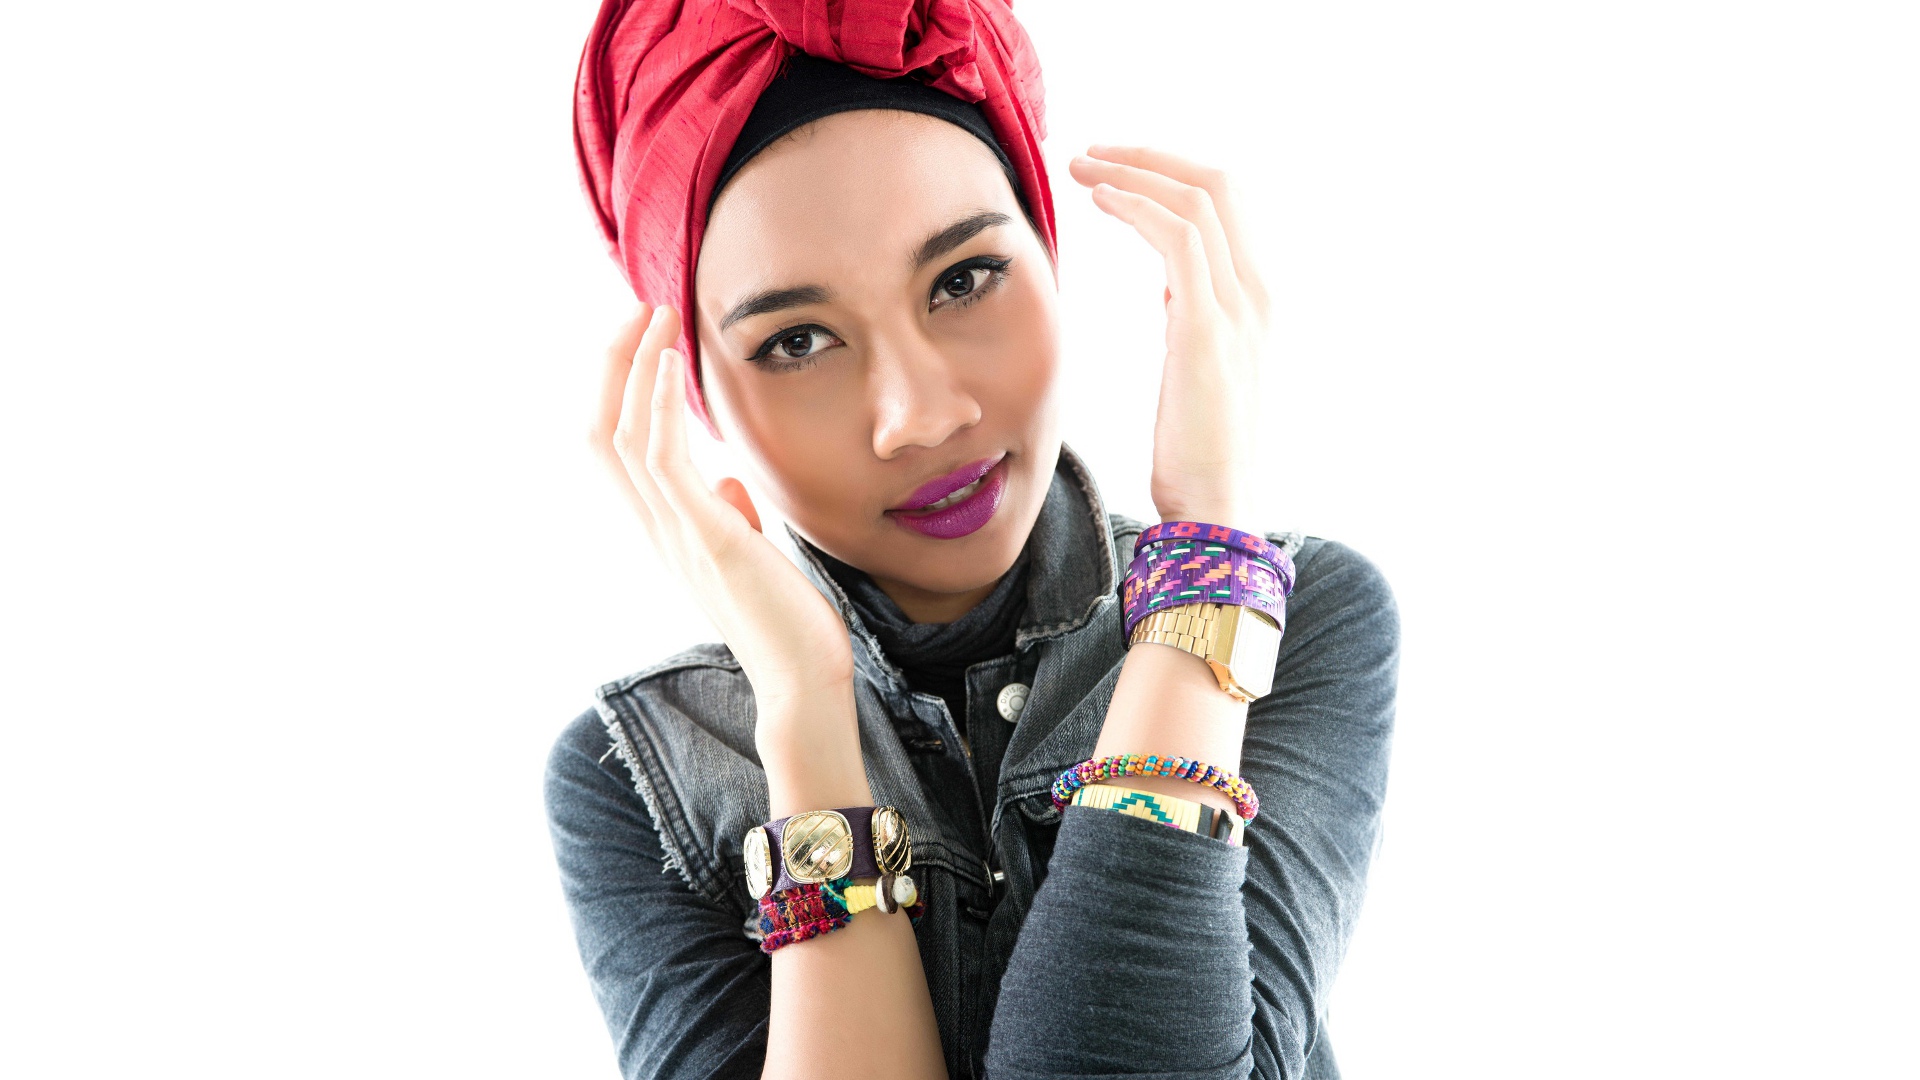 Malaysian Pop Singer Yuna on Moving to Los Angeles, Being 